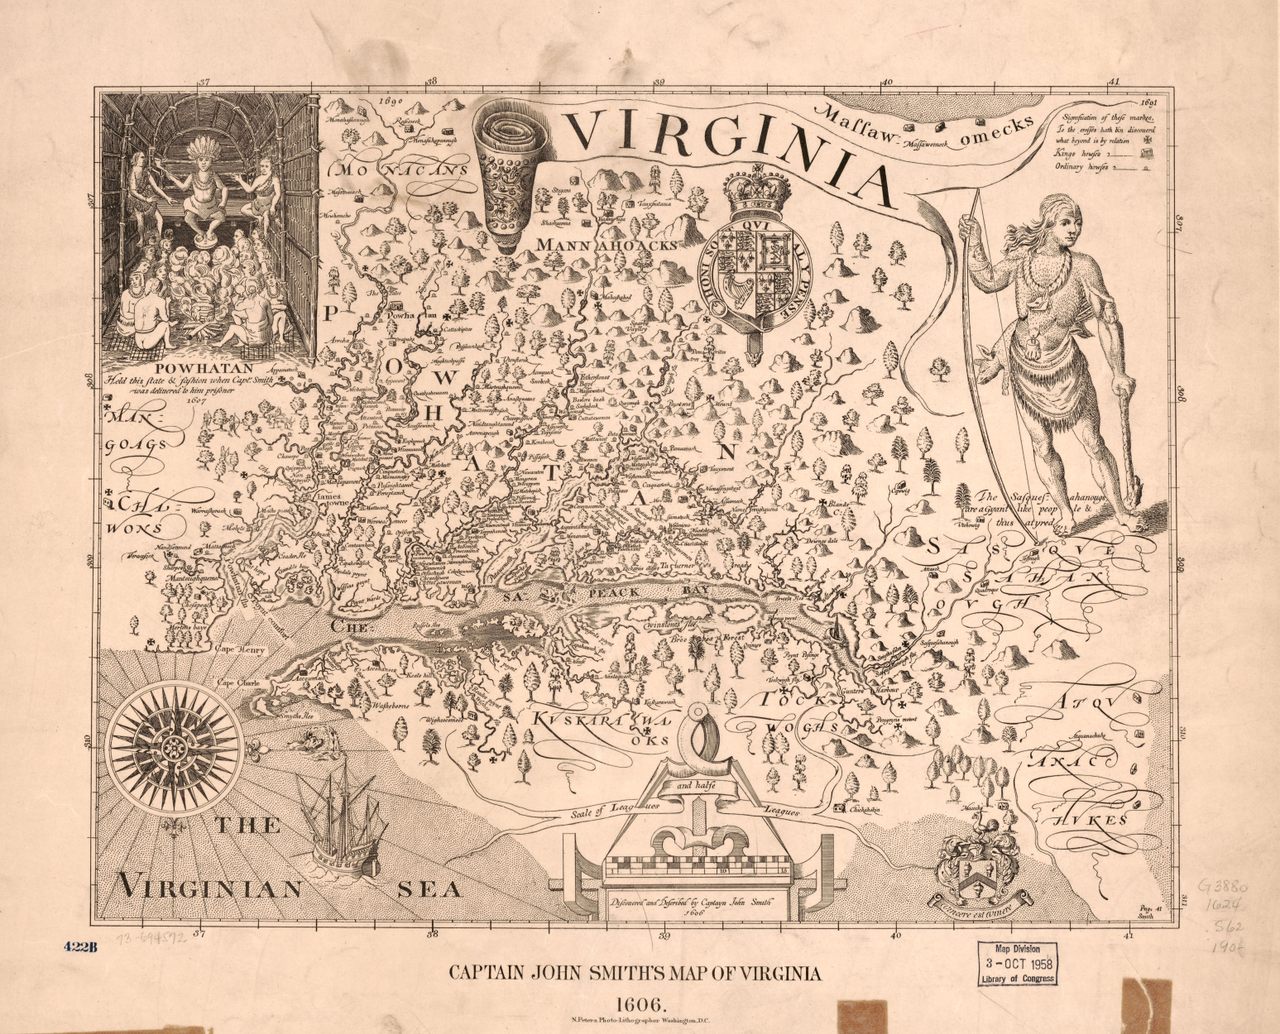 This map by John Smith became the defining image of Virginia for many Europeans throughout the 1600s. The presence of Powhatan, a powerful indigenous leader, both through pictures and regional names, is one of its most striking features. 